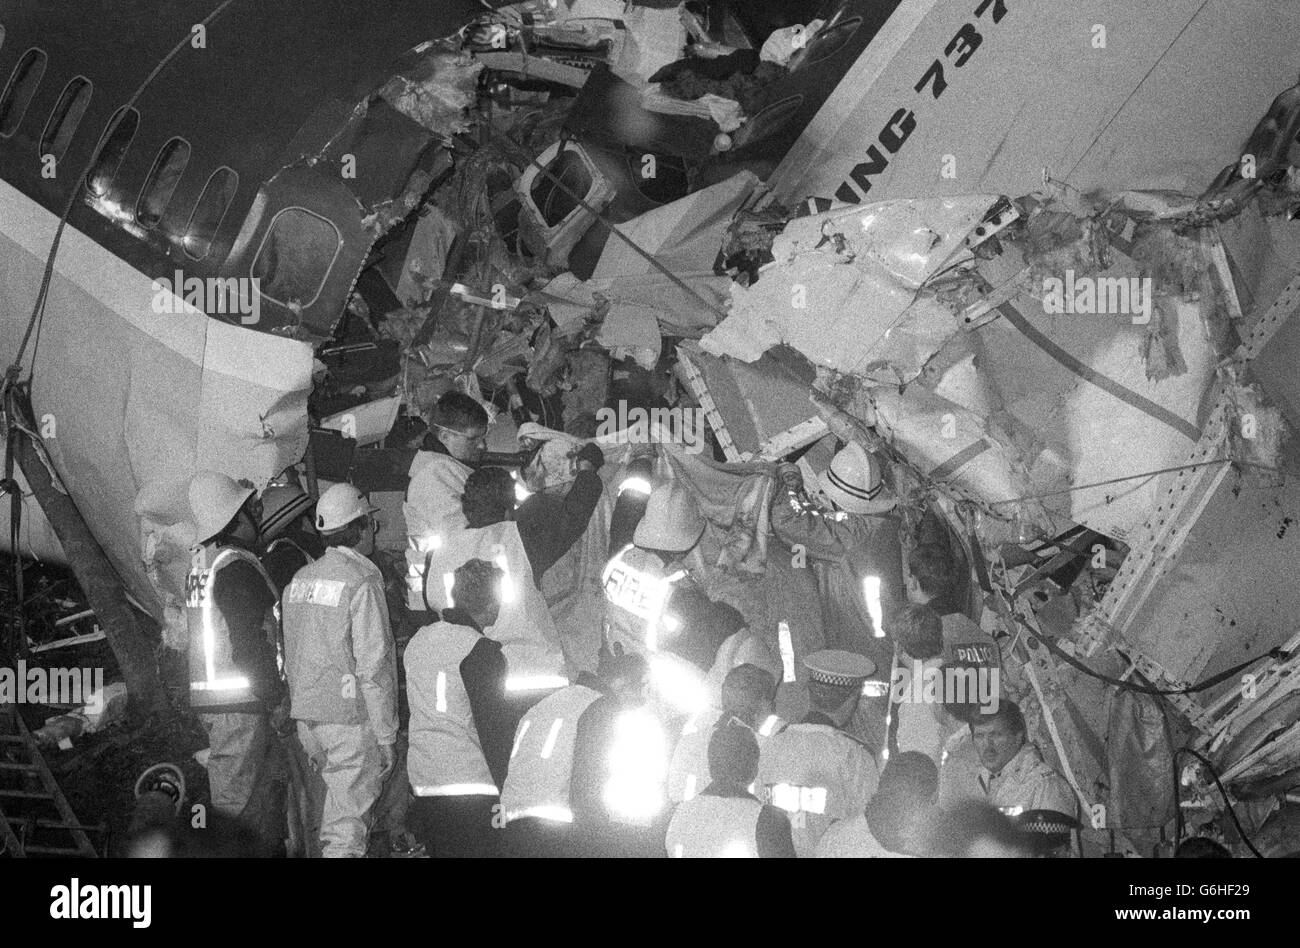 Rescue workers prepare to remove a body from the wreckage of Boeing 737 after the airliner, with 125 passengers and crew on board, crashed into an embankment on the M1 near Kegworth in Leicestershire. Stock Photo